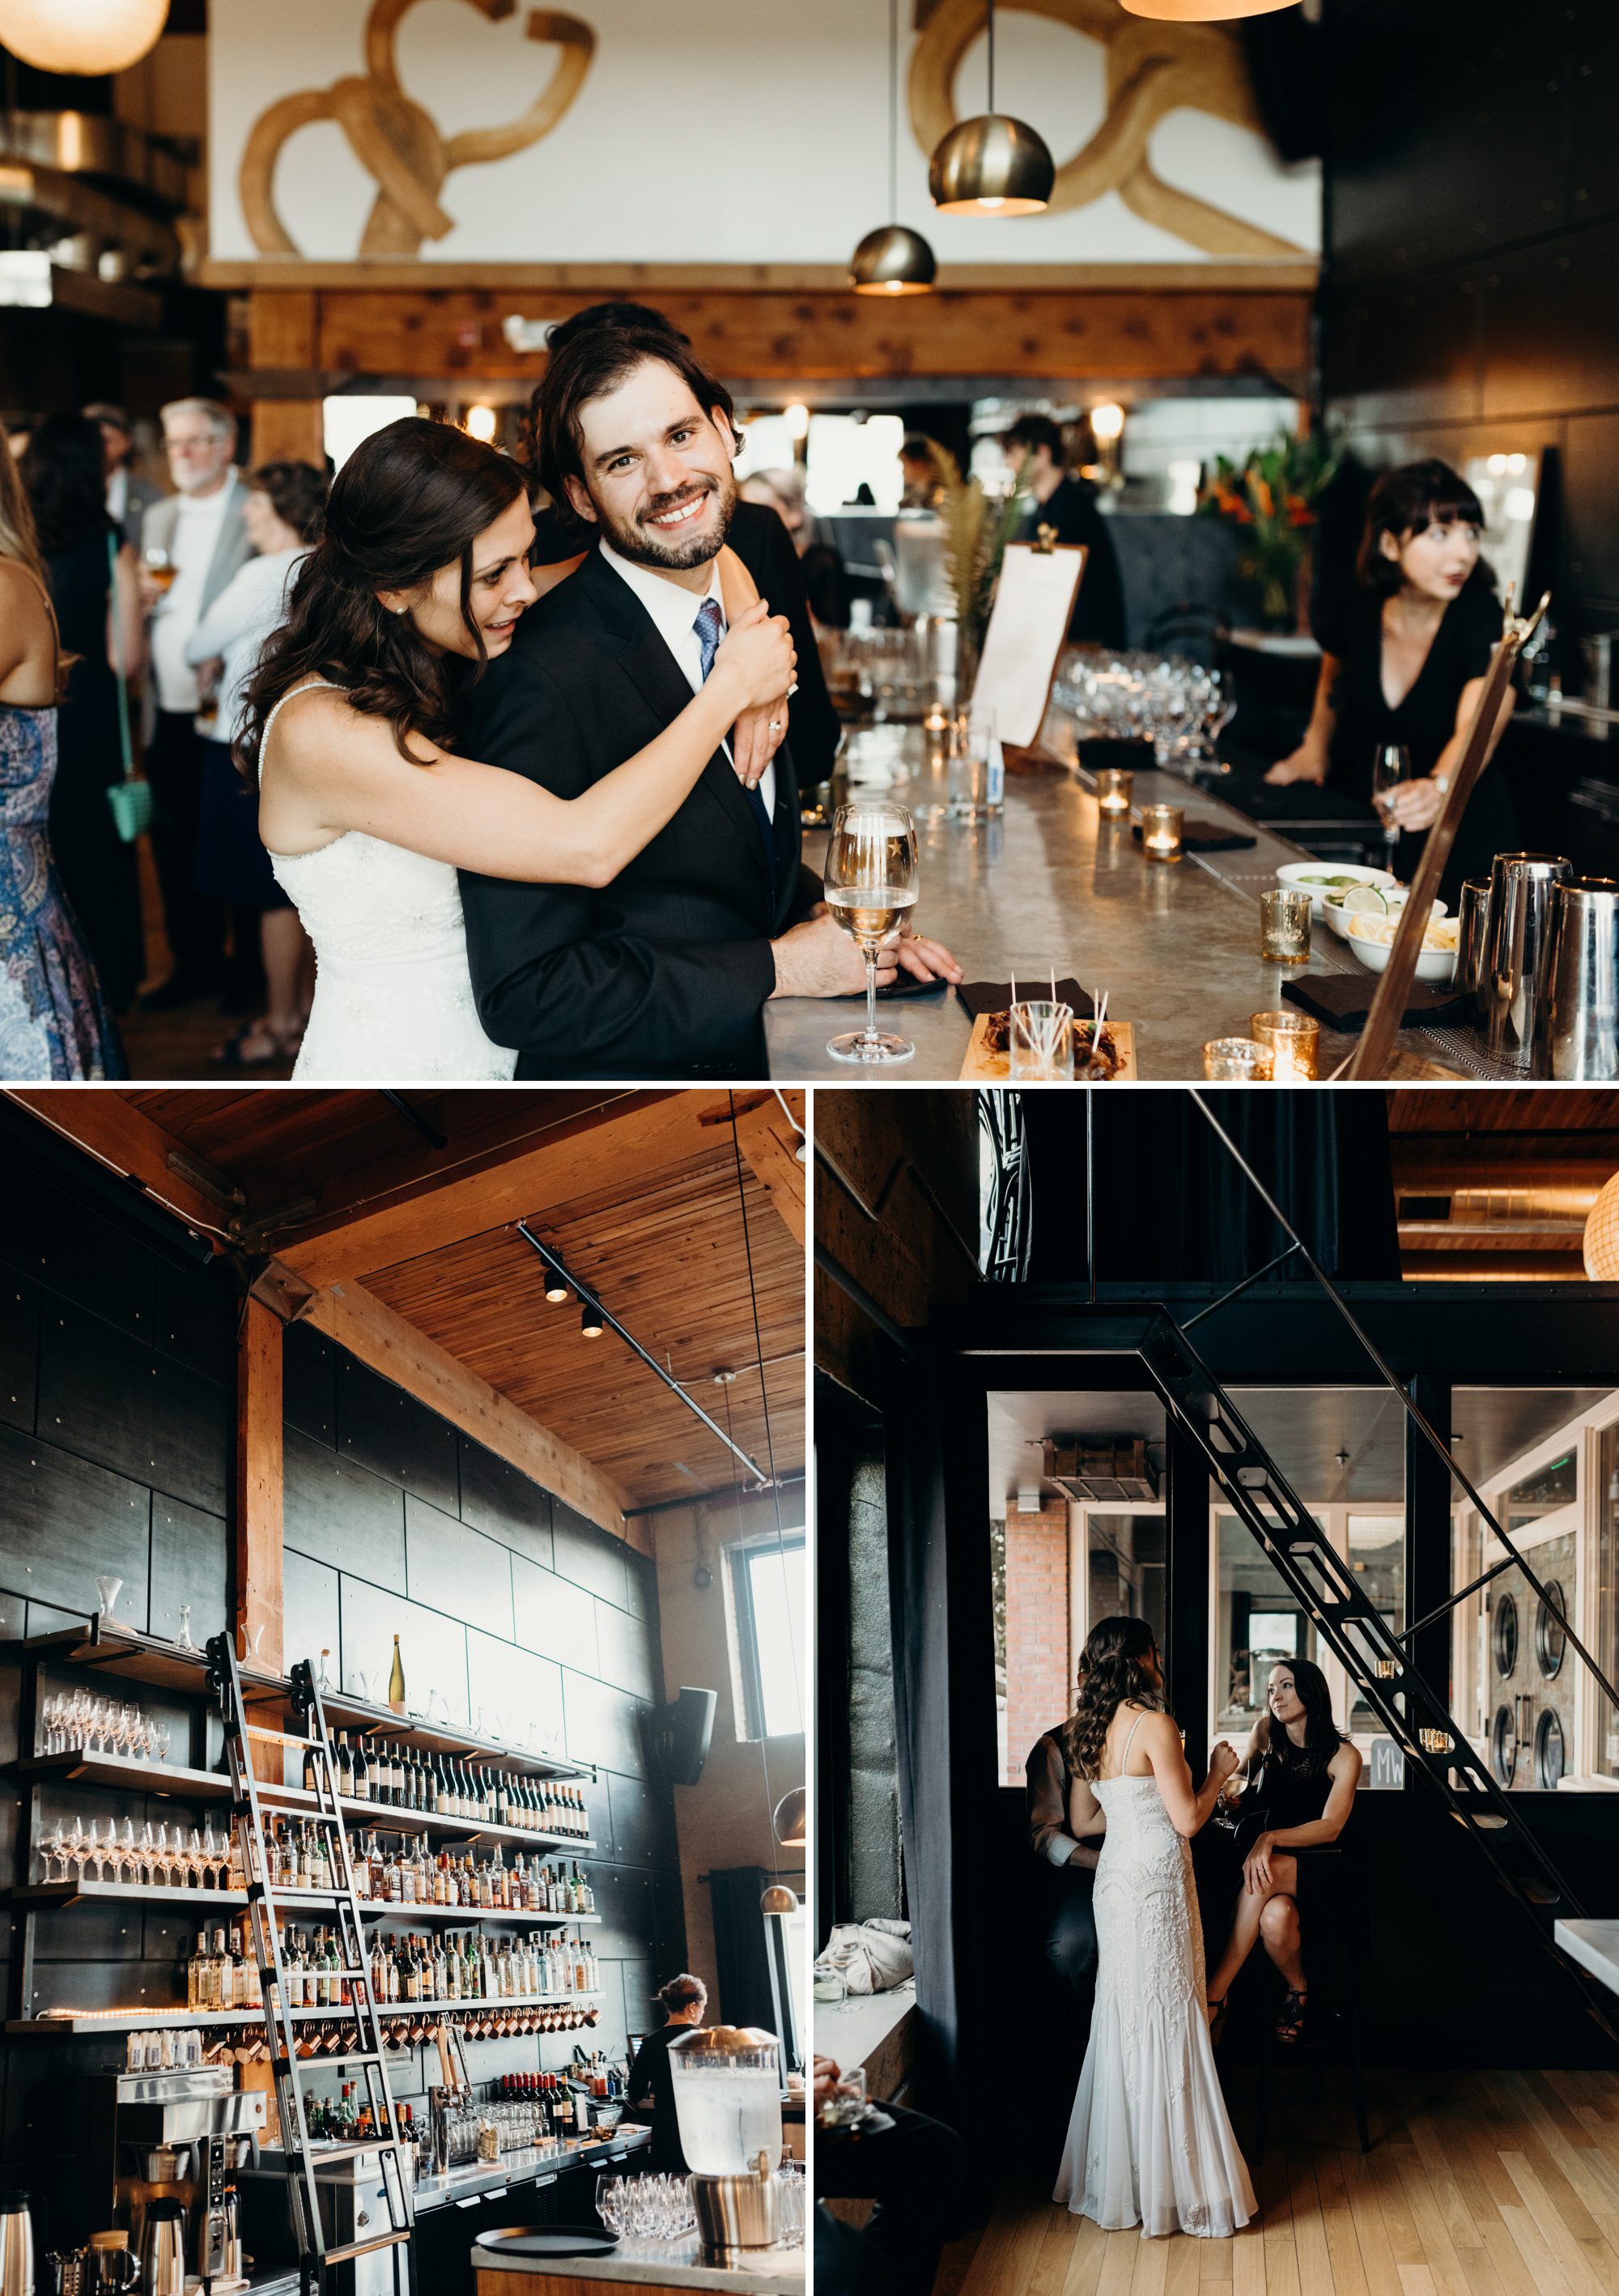 The bride and groom grab a drink at the bar. By Plaza del Toro wedding photographer Briana Morrison.